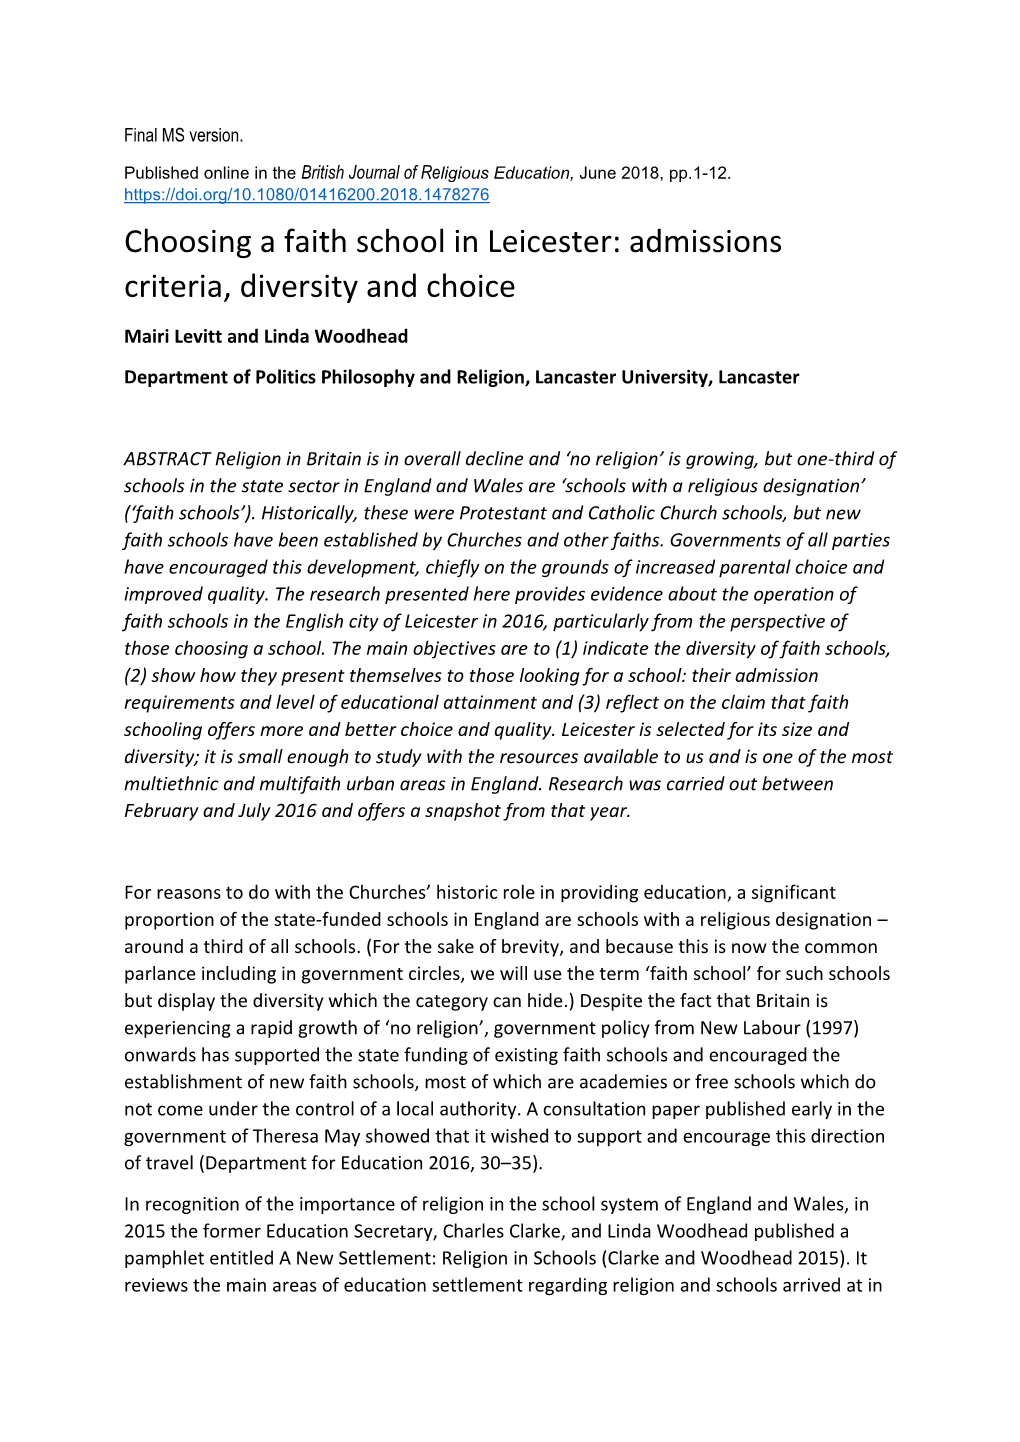 Choosing a Faith School in Leicester: Admissions Criteria, Diversity and Choice